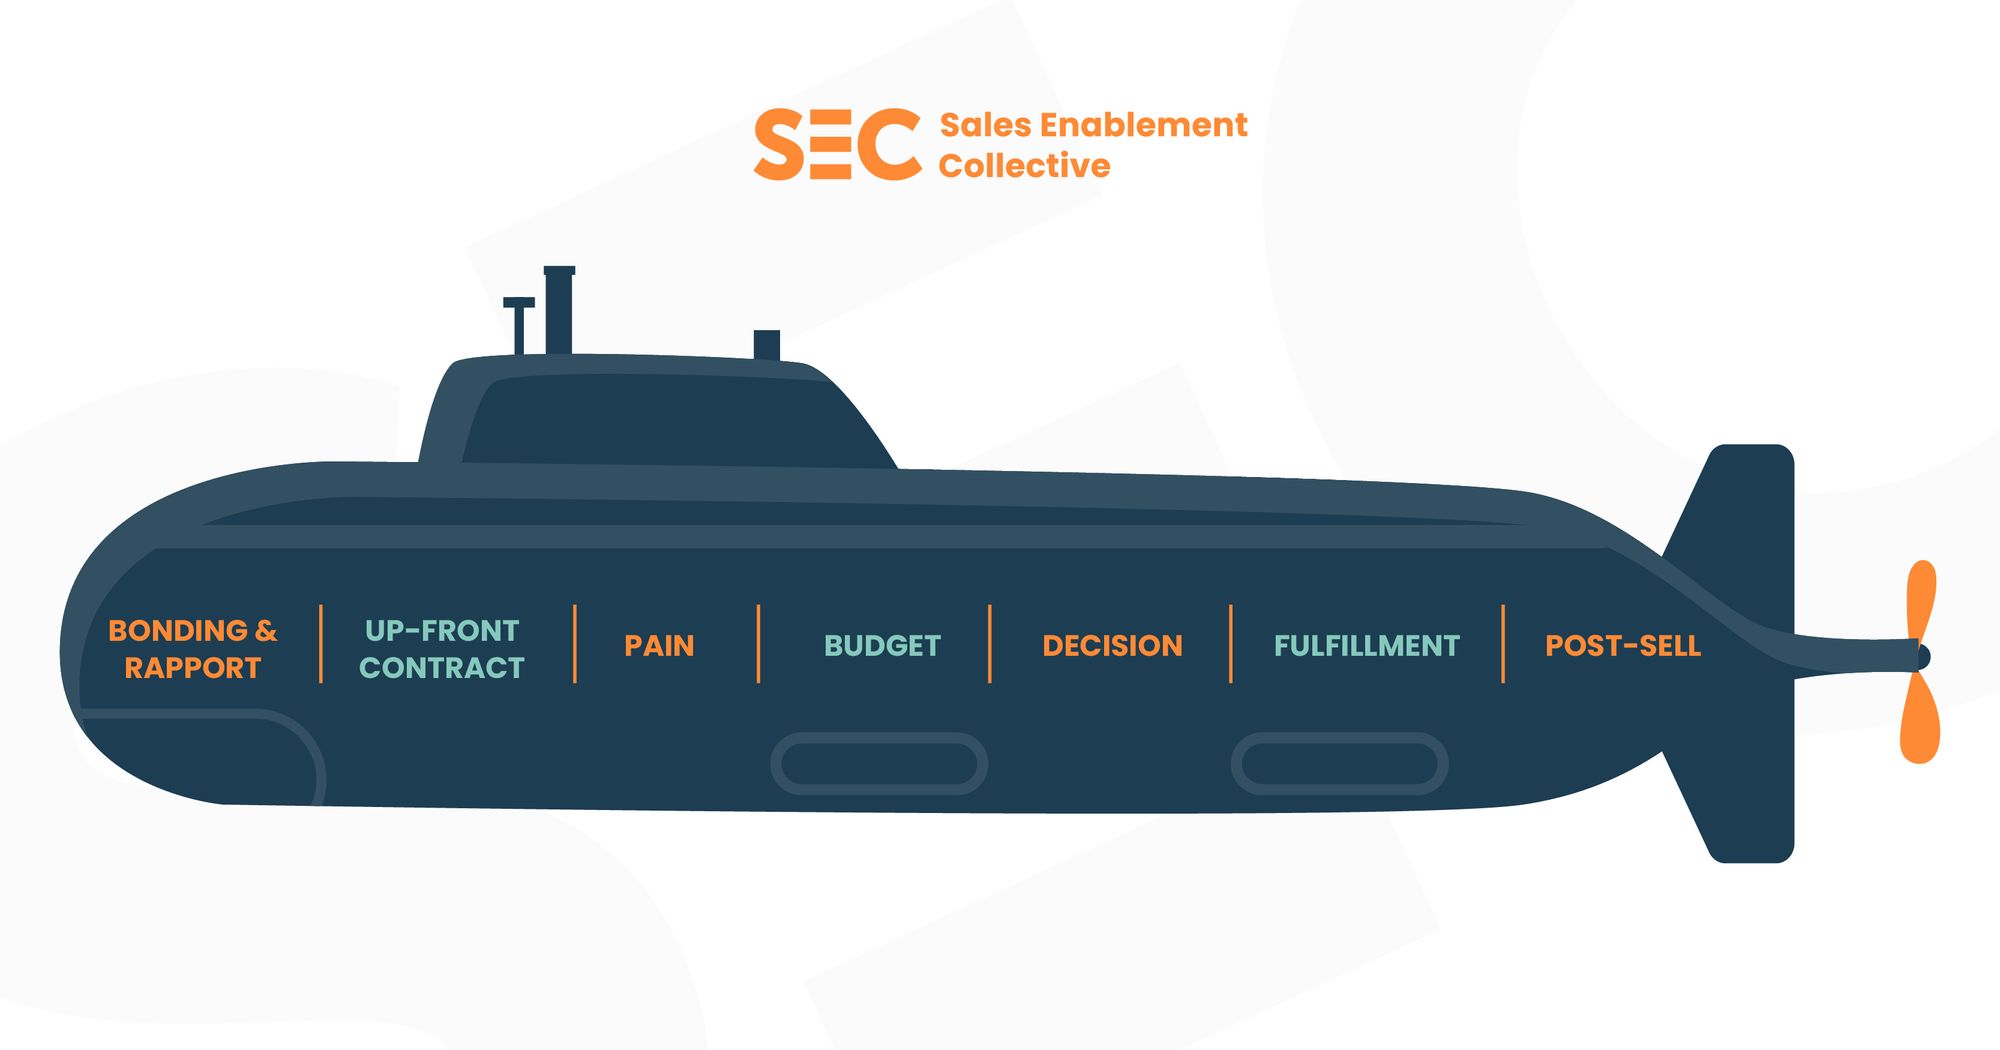 The Sandler submarine: bonding & rapport, up-front contract, pain, budget, decision, fulfilment, post-sell